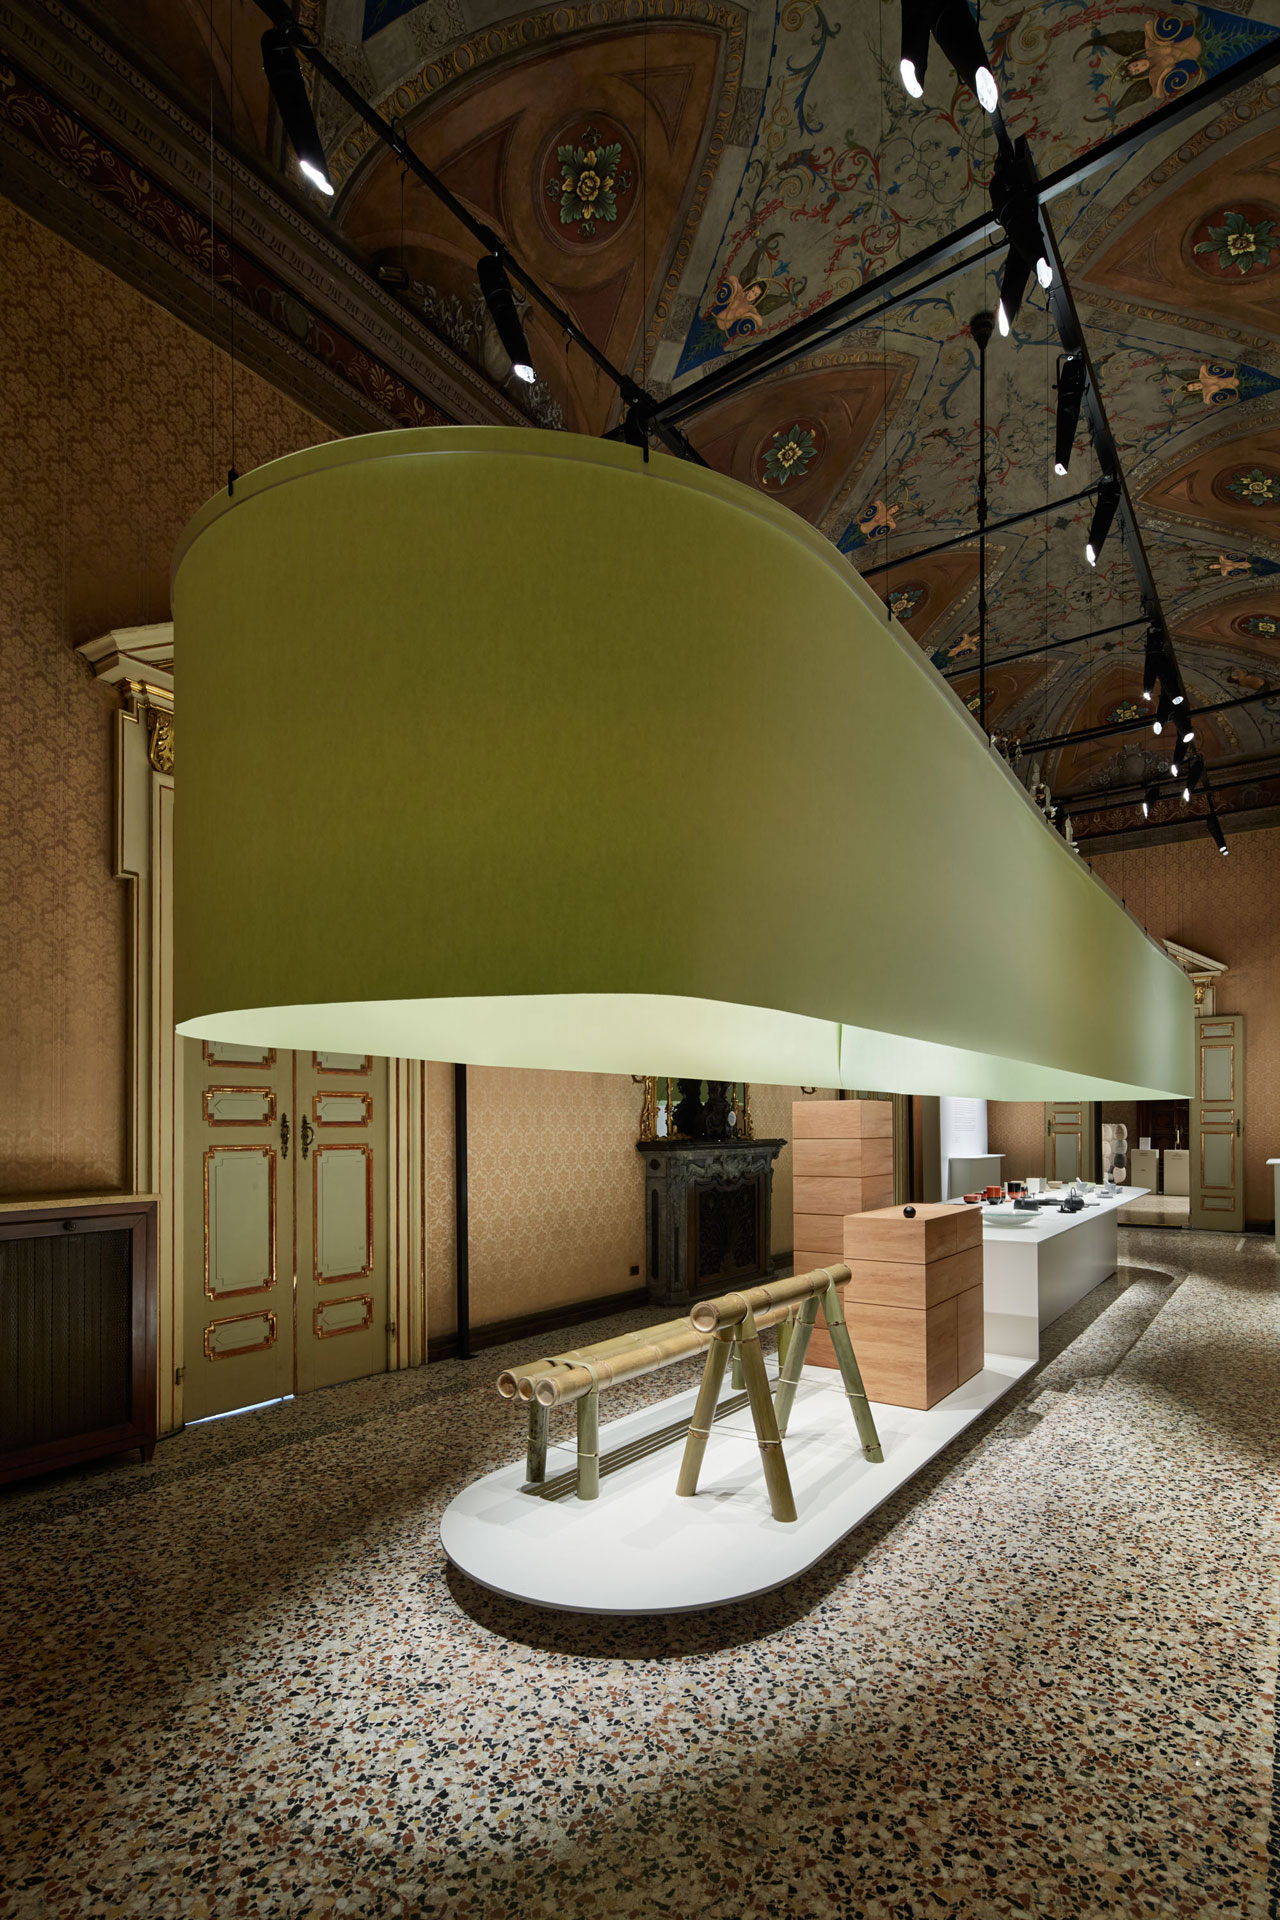 The exhibition of Japan Creative inside Palazzo Litta during Milan Design Week 2017.